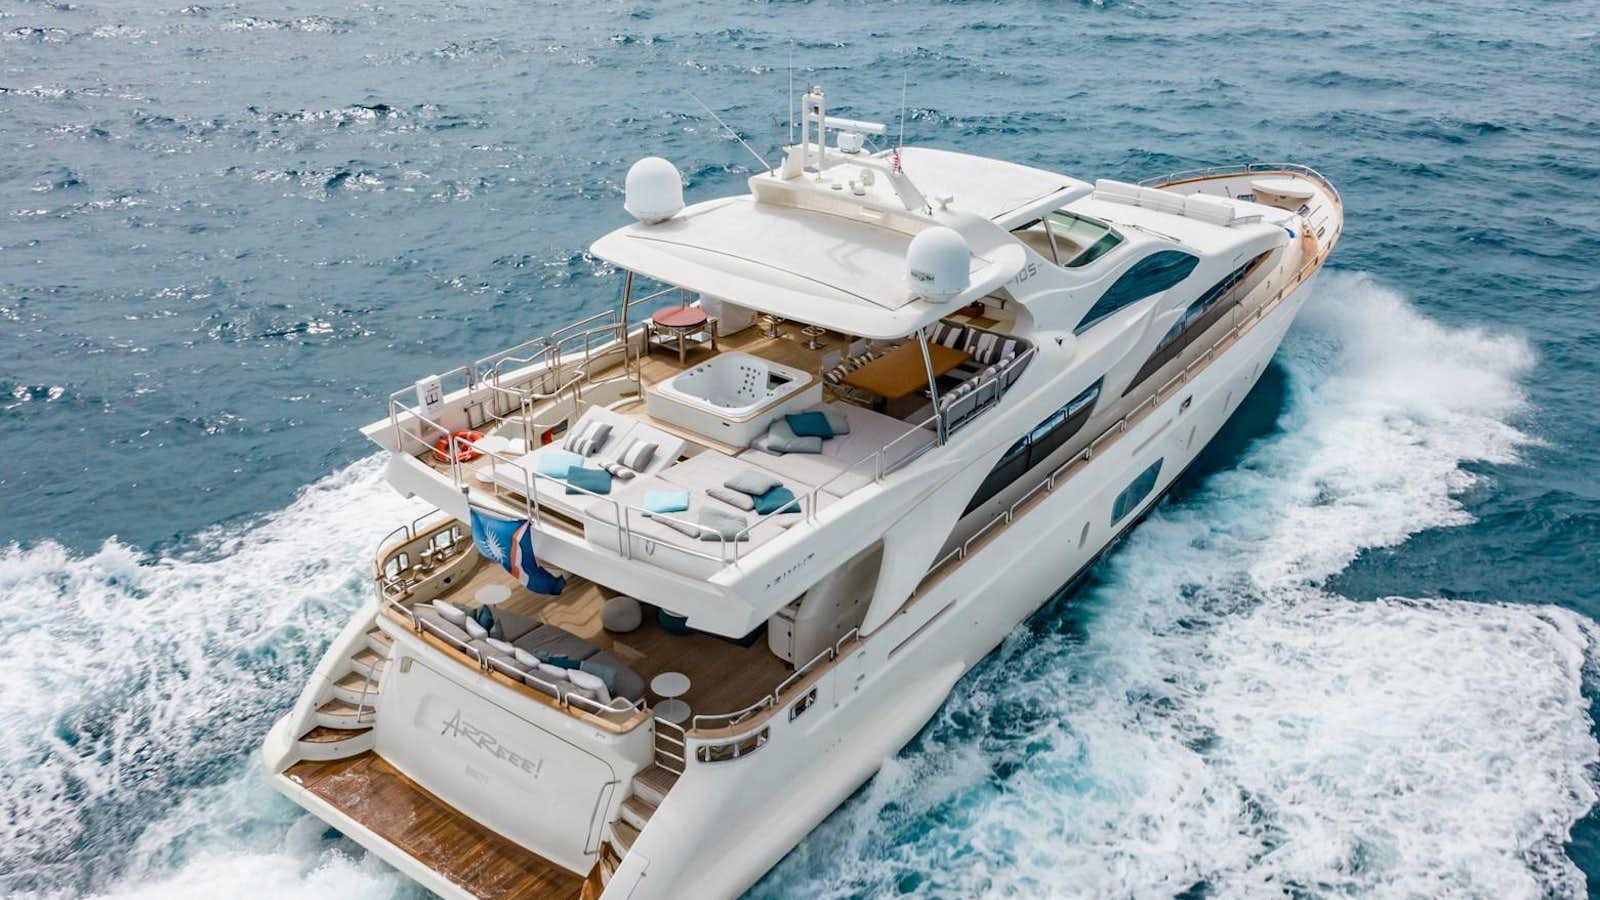 Watch Video for ARREEE! Yacht for Sale